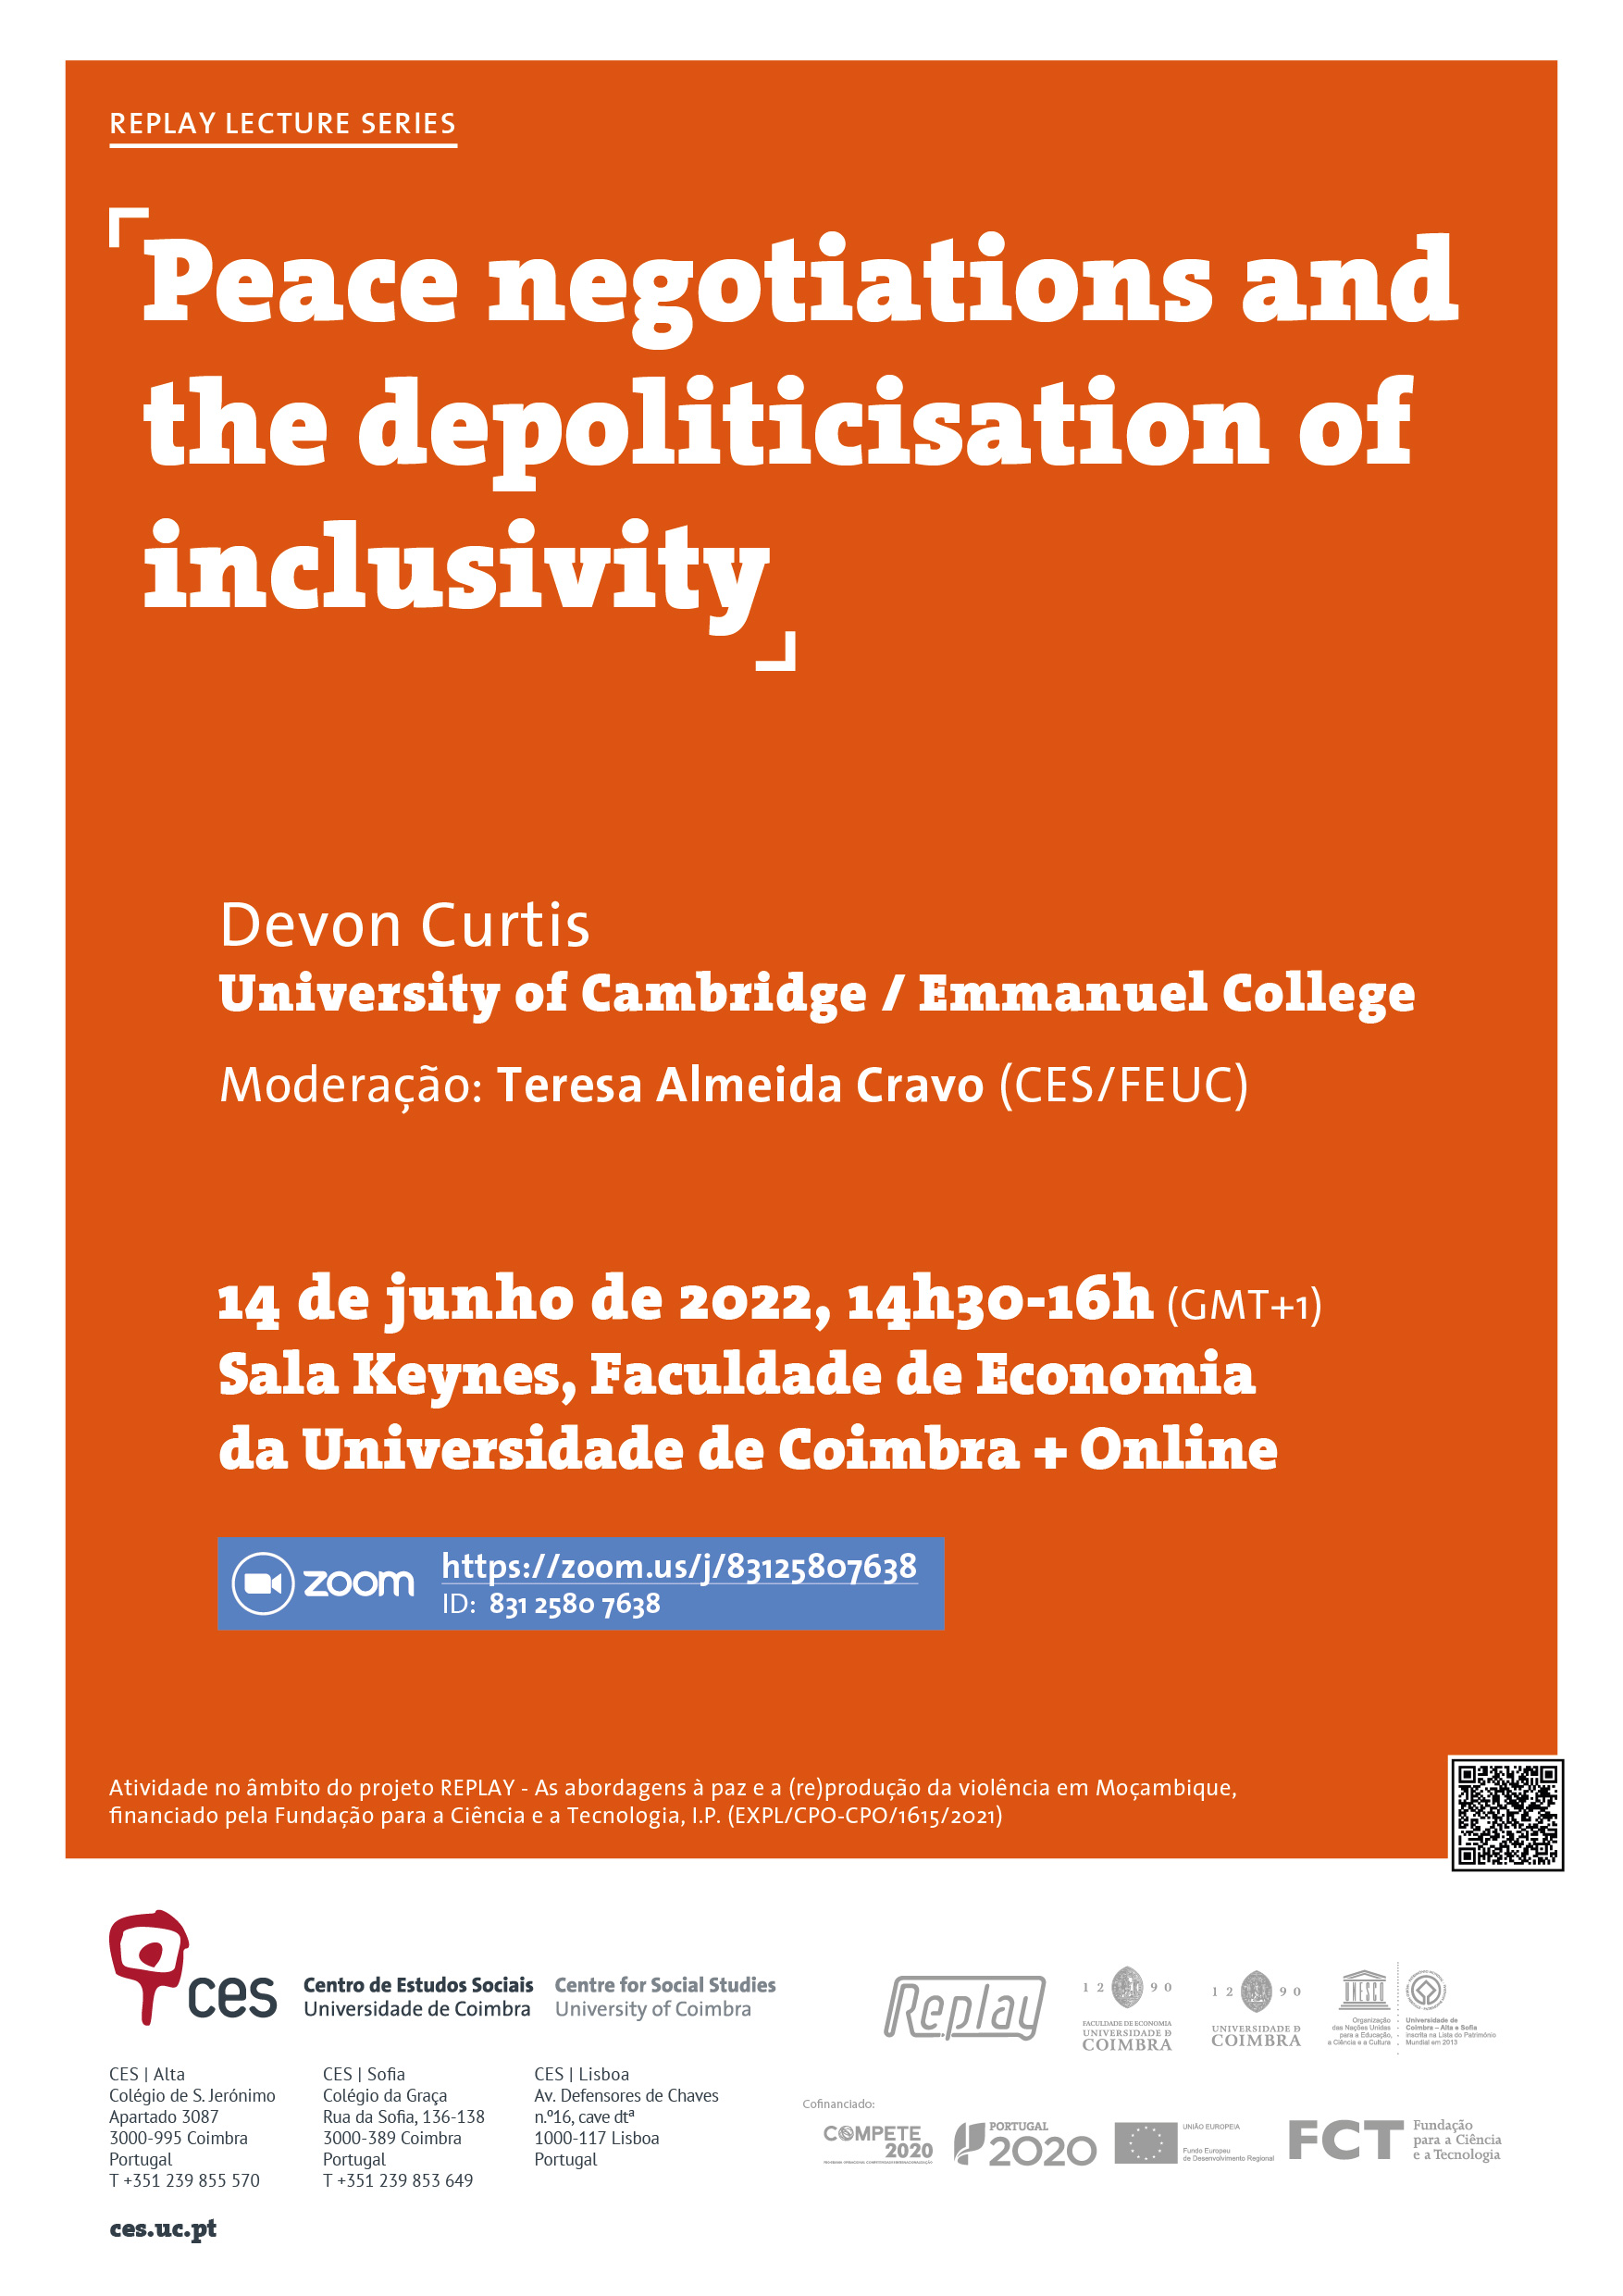 Peace negotiations and the depoliticisation of inclusivity<span id="edit_39240"><script>$(function() { $('#edit_39240').load( "/myces/user/editobj.php?tipo=evento&id=39240" ); });</script></span>